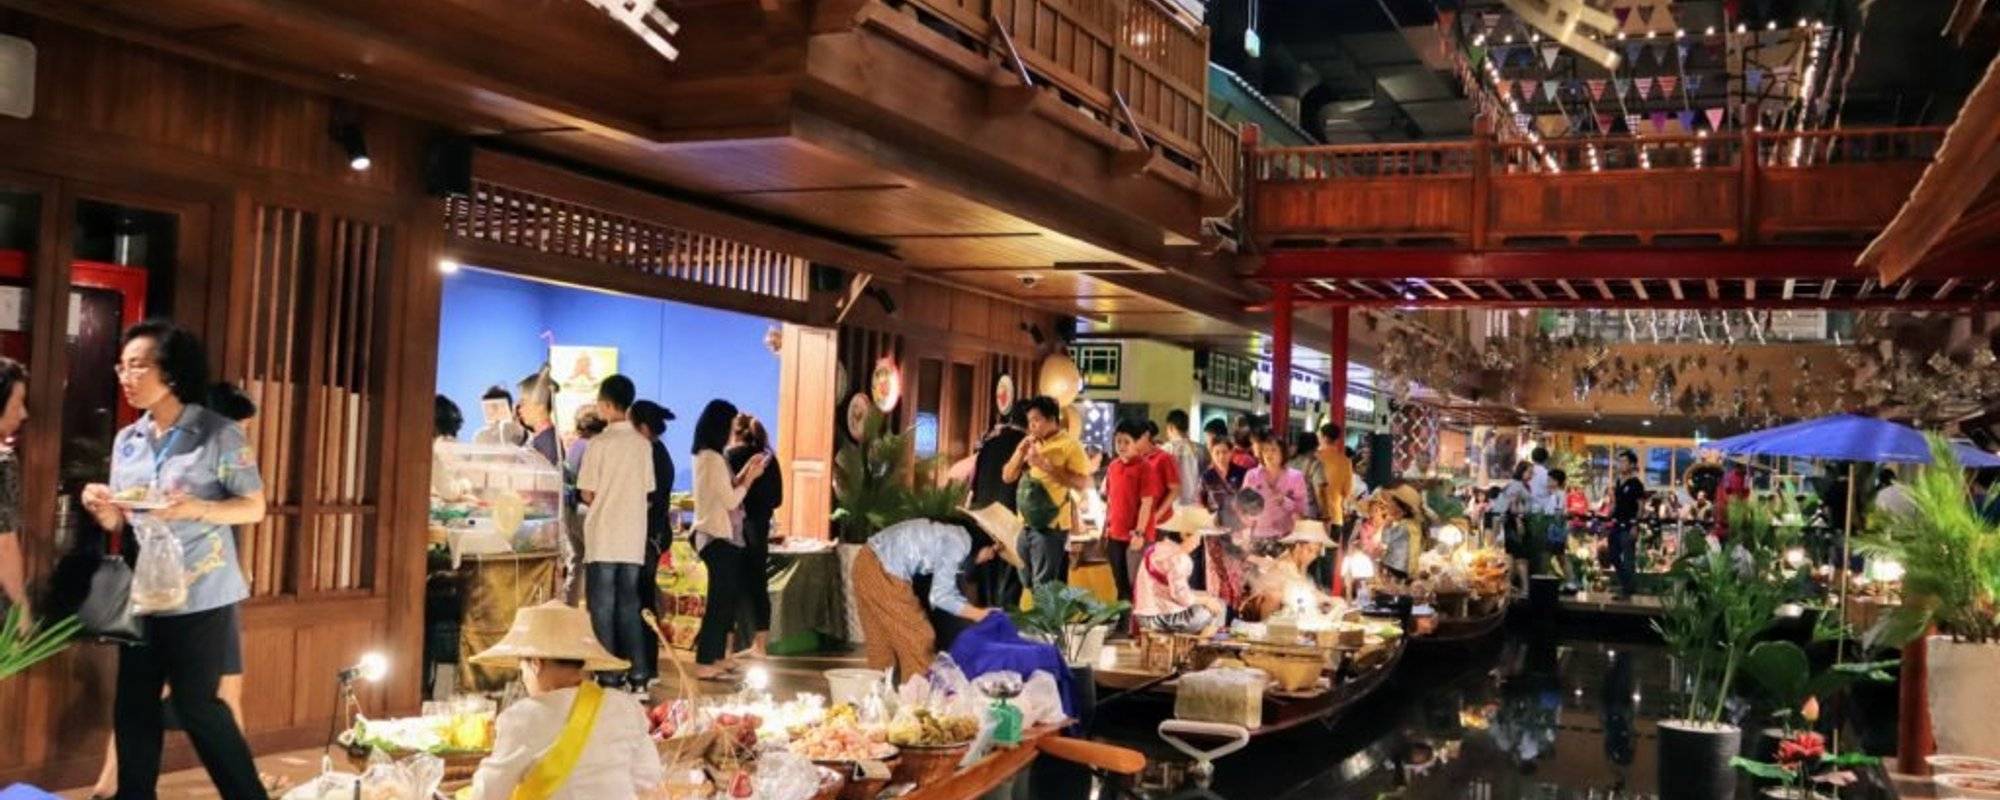 Have you ever seen a floating market in a mall?